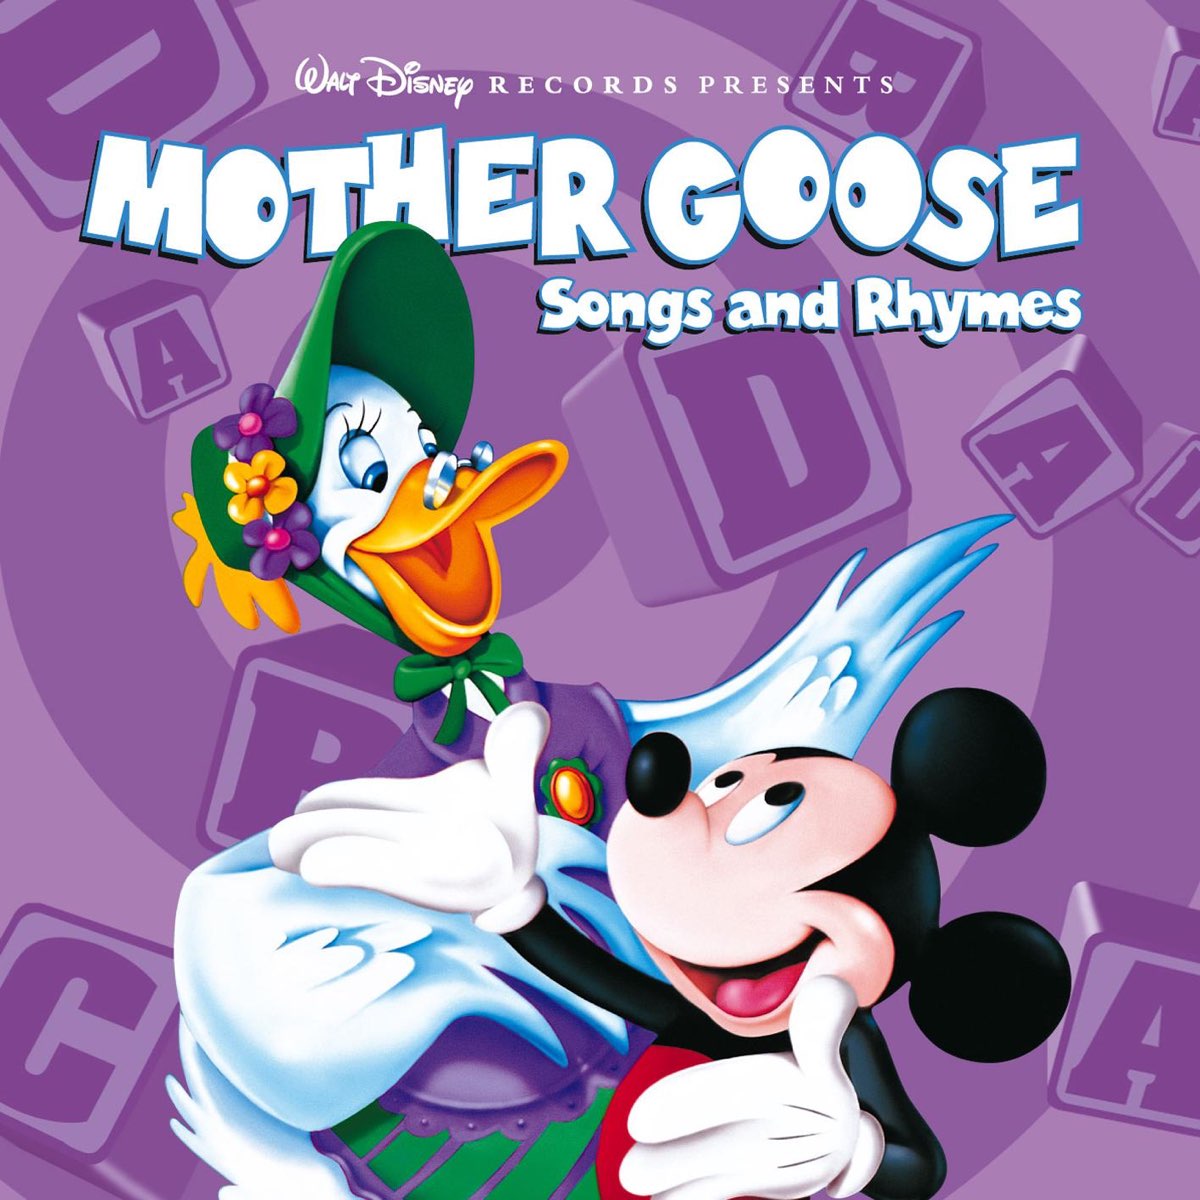 Mother Goose Songs and Rhymes by Various Artists on Apple Music